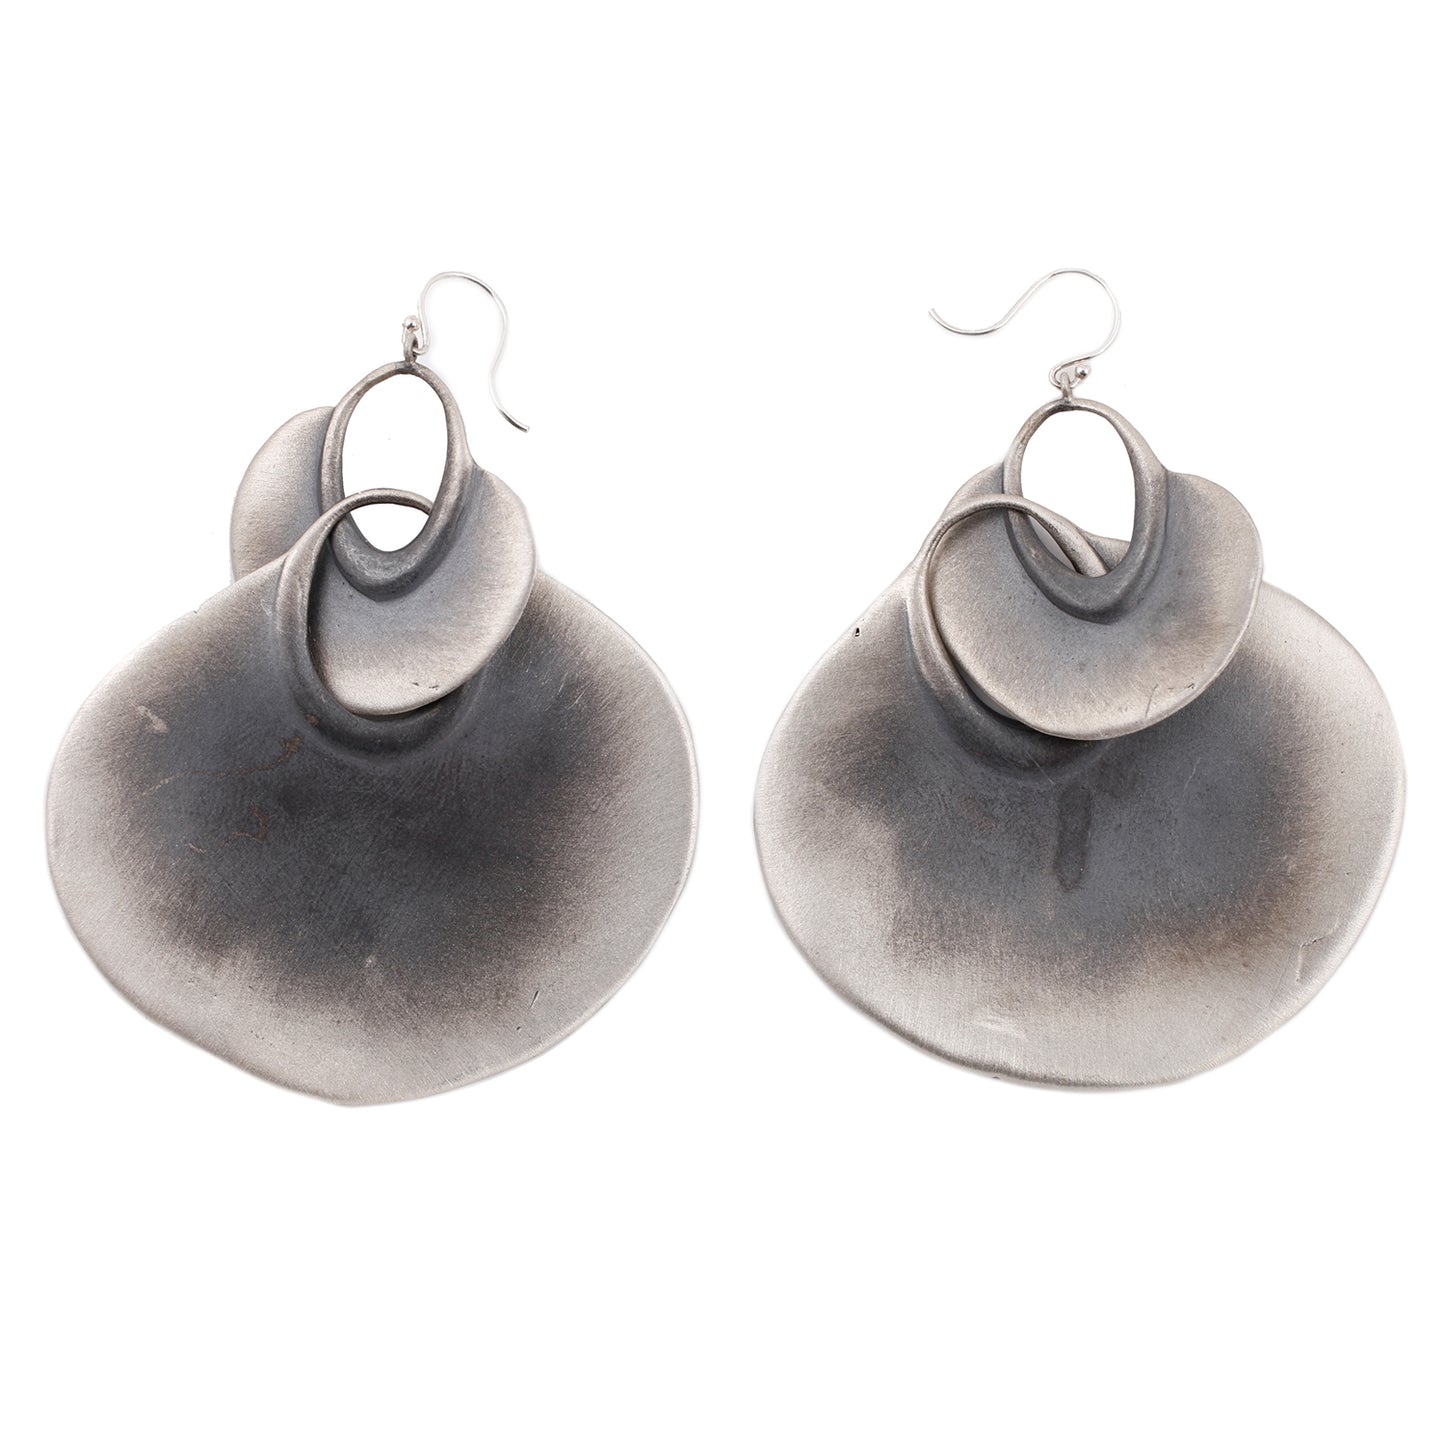 TenThousandThings Extra Large Peacock Earrings in brushed sterling silver